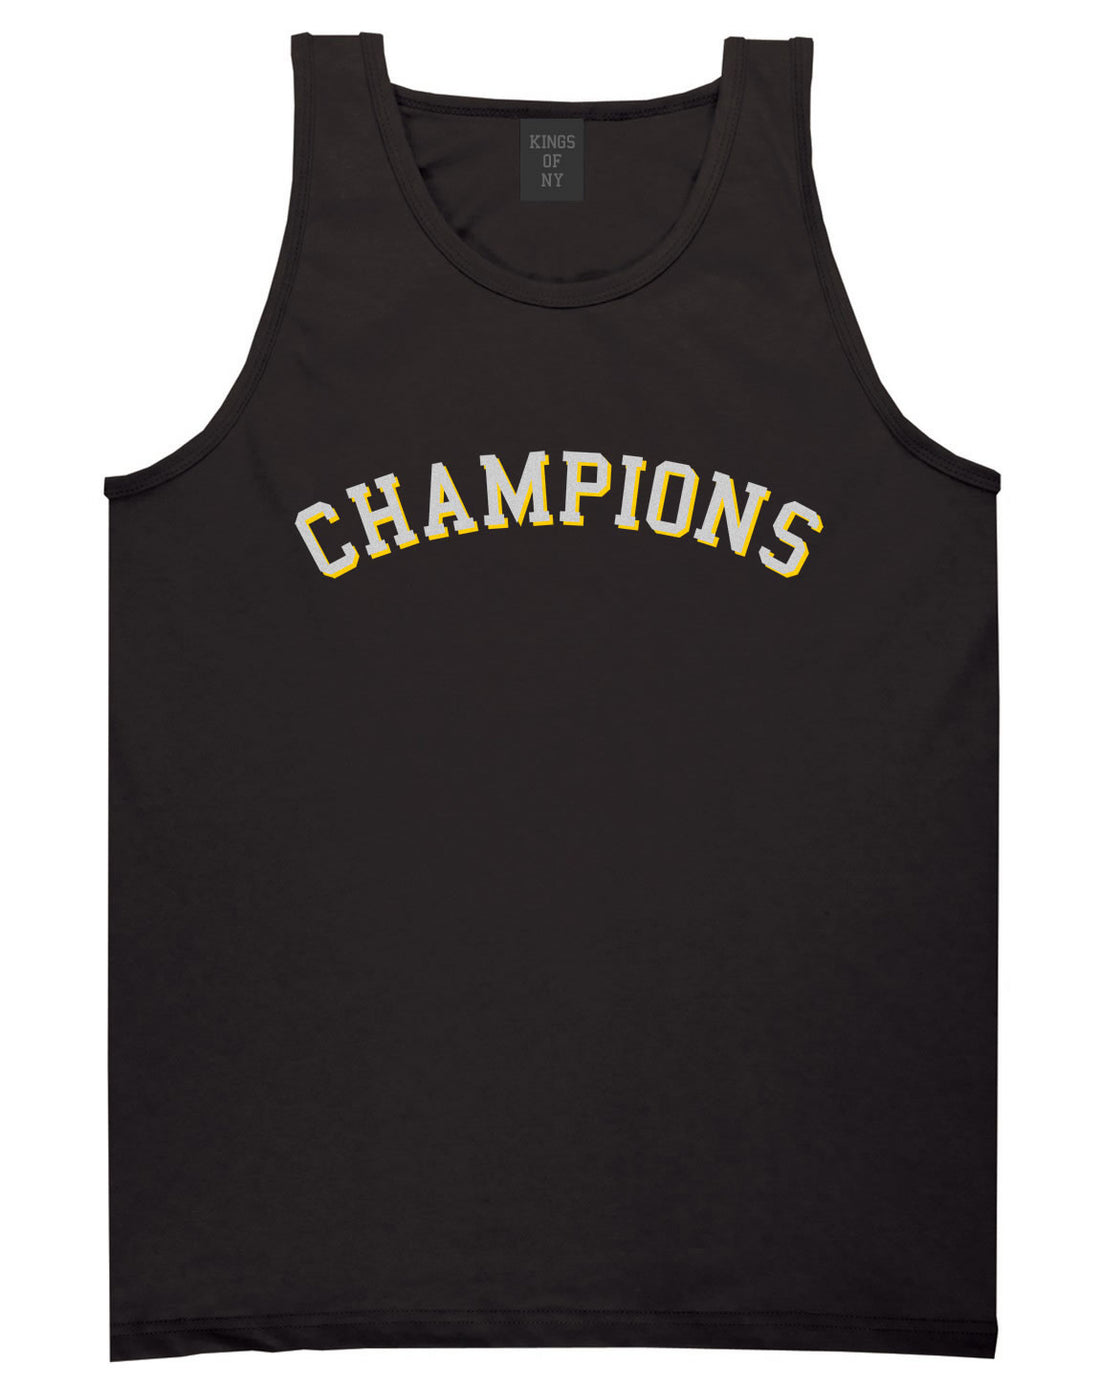 Champions Tank Top in Black by Kings Of NY